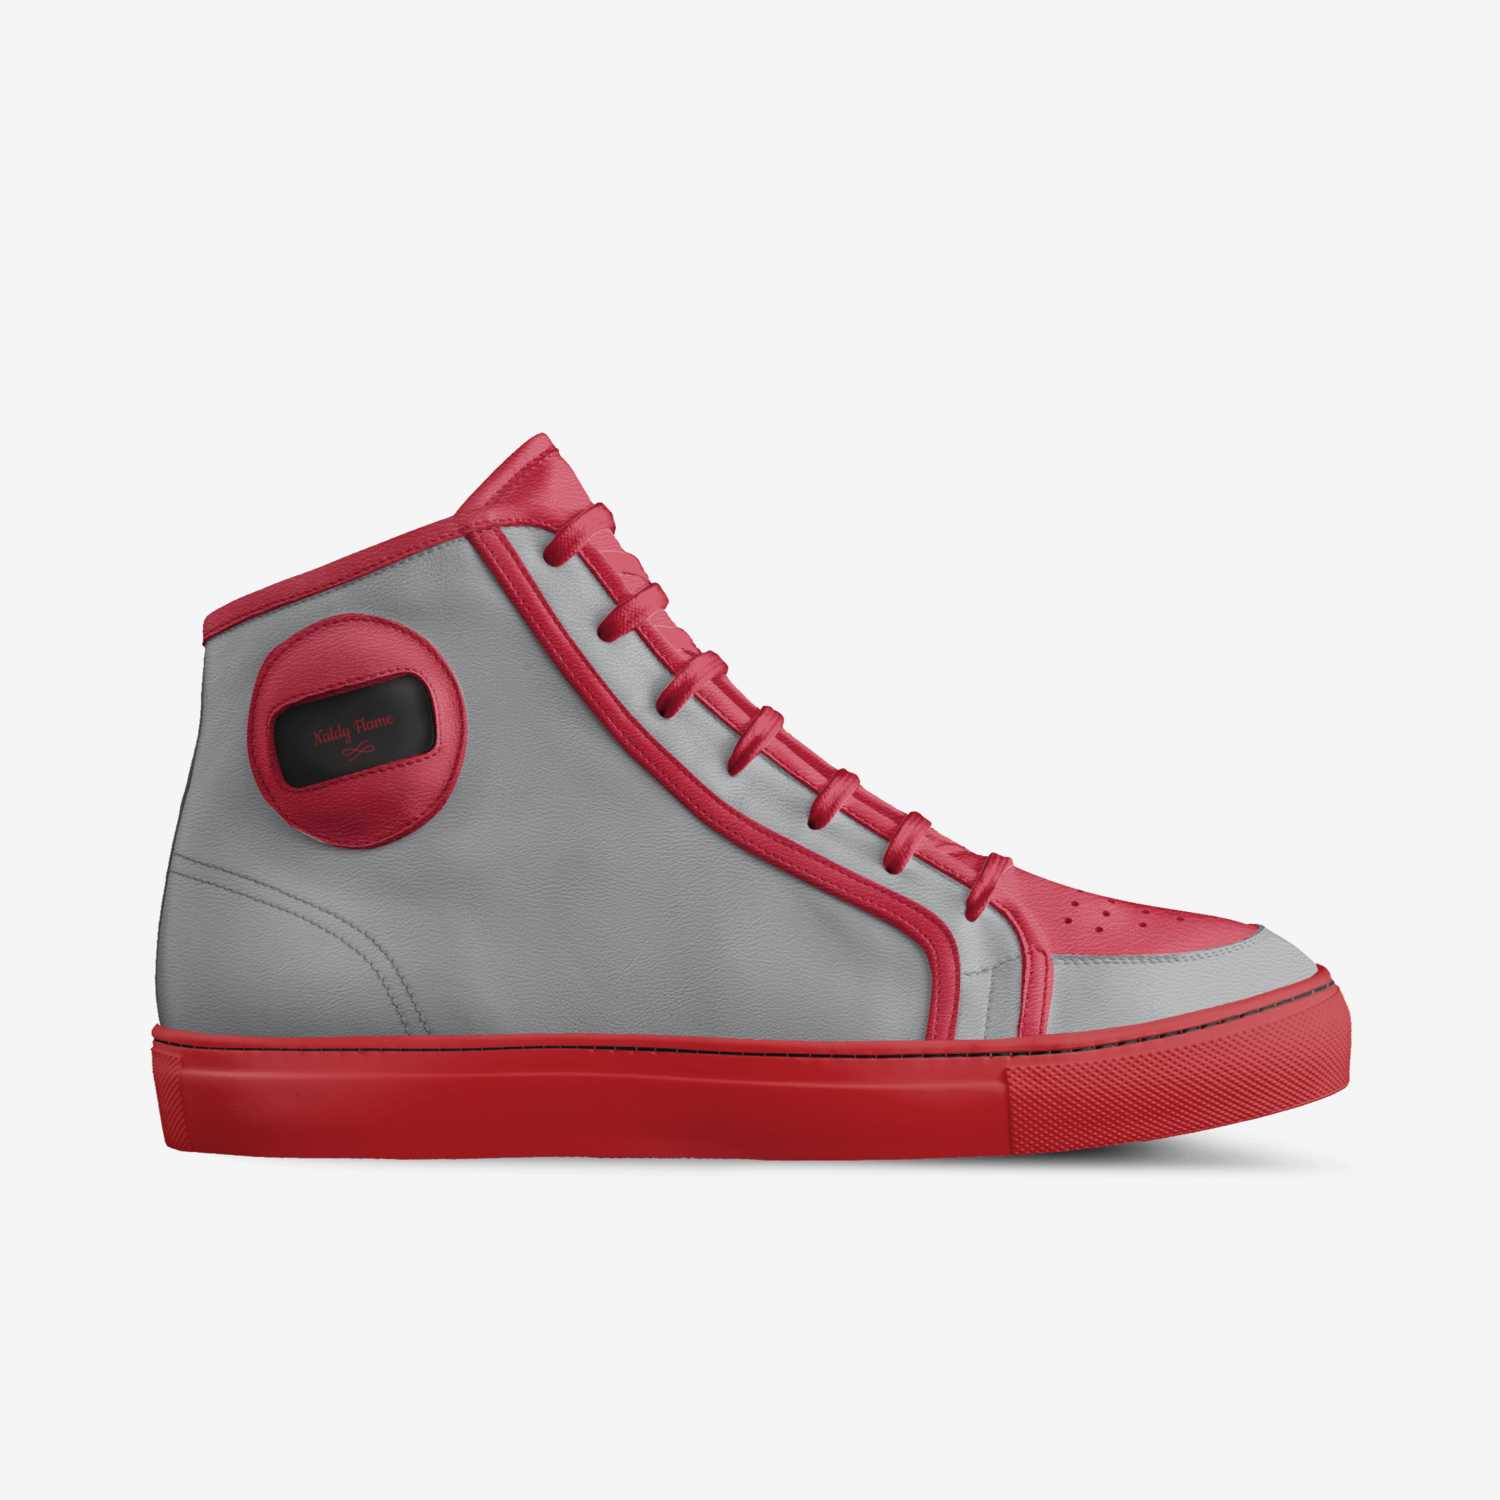 Naldy Flame | A Custom Shoe concept by Ronald Nealey